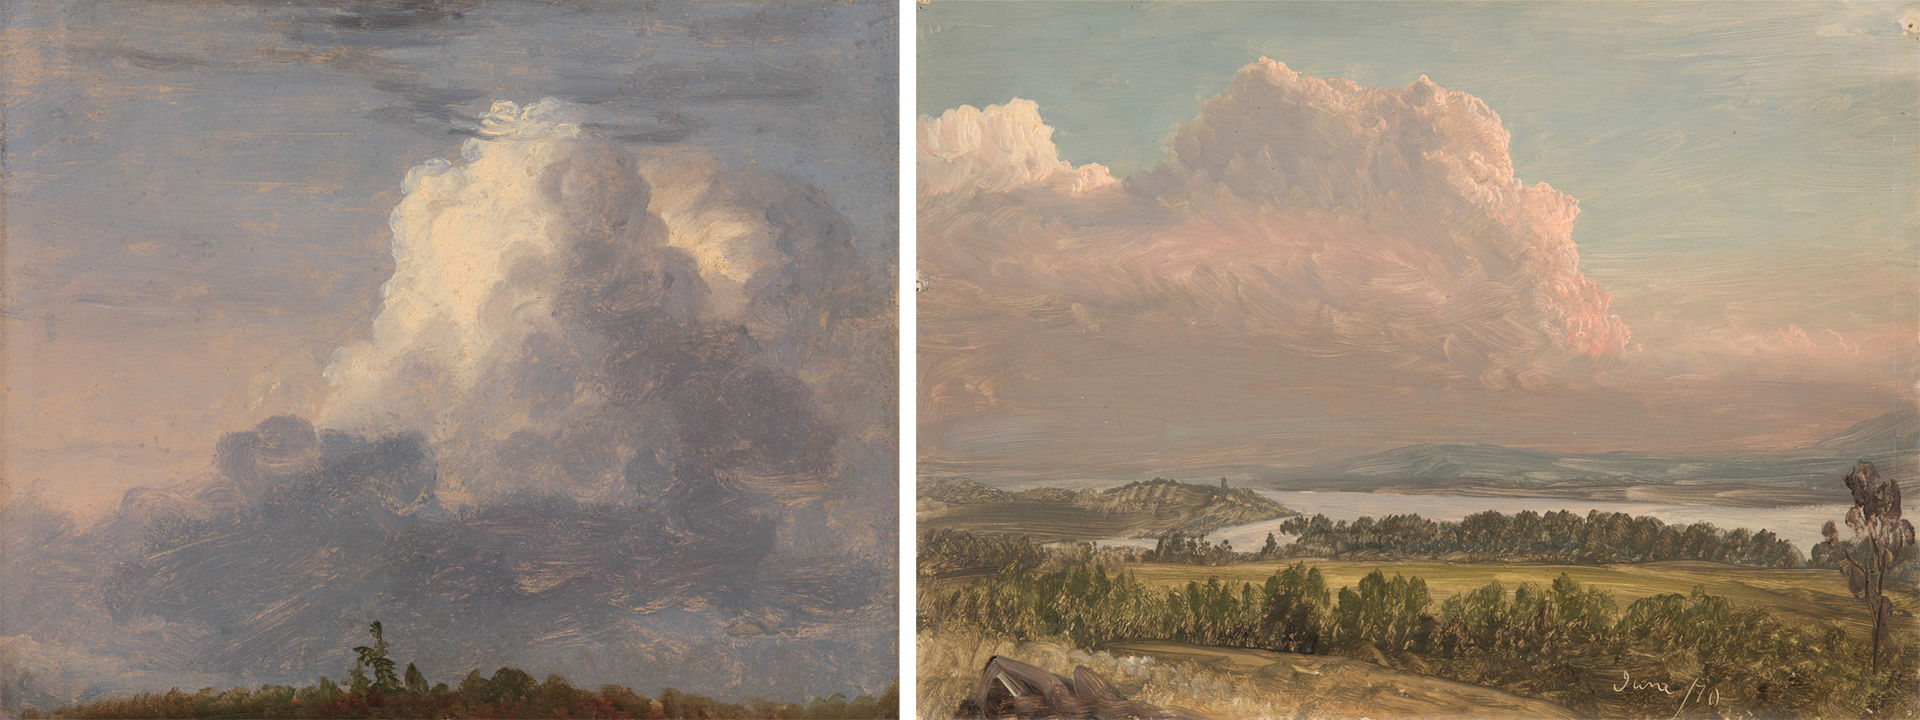 Thomas Cole and Clouds